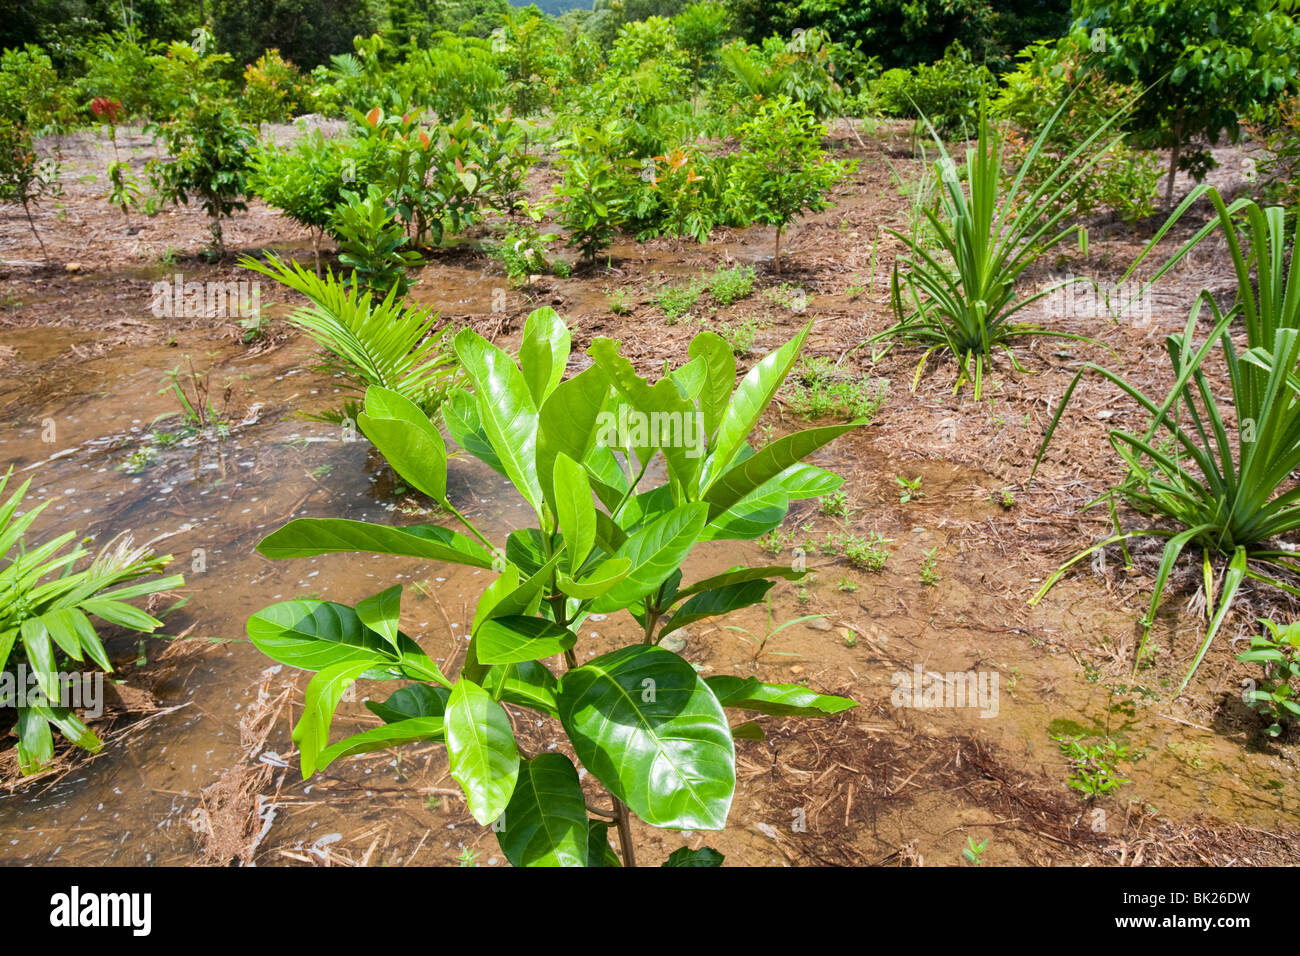 Planting rain forest trees in the Daintree as part of a carbon offset project, Australia. Stock Photo